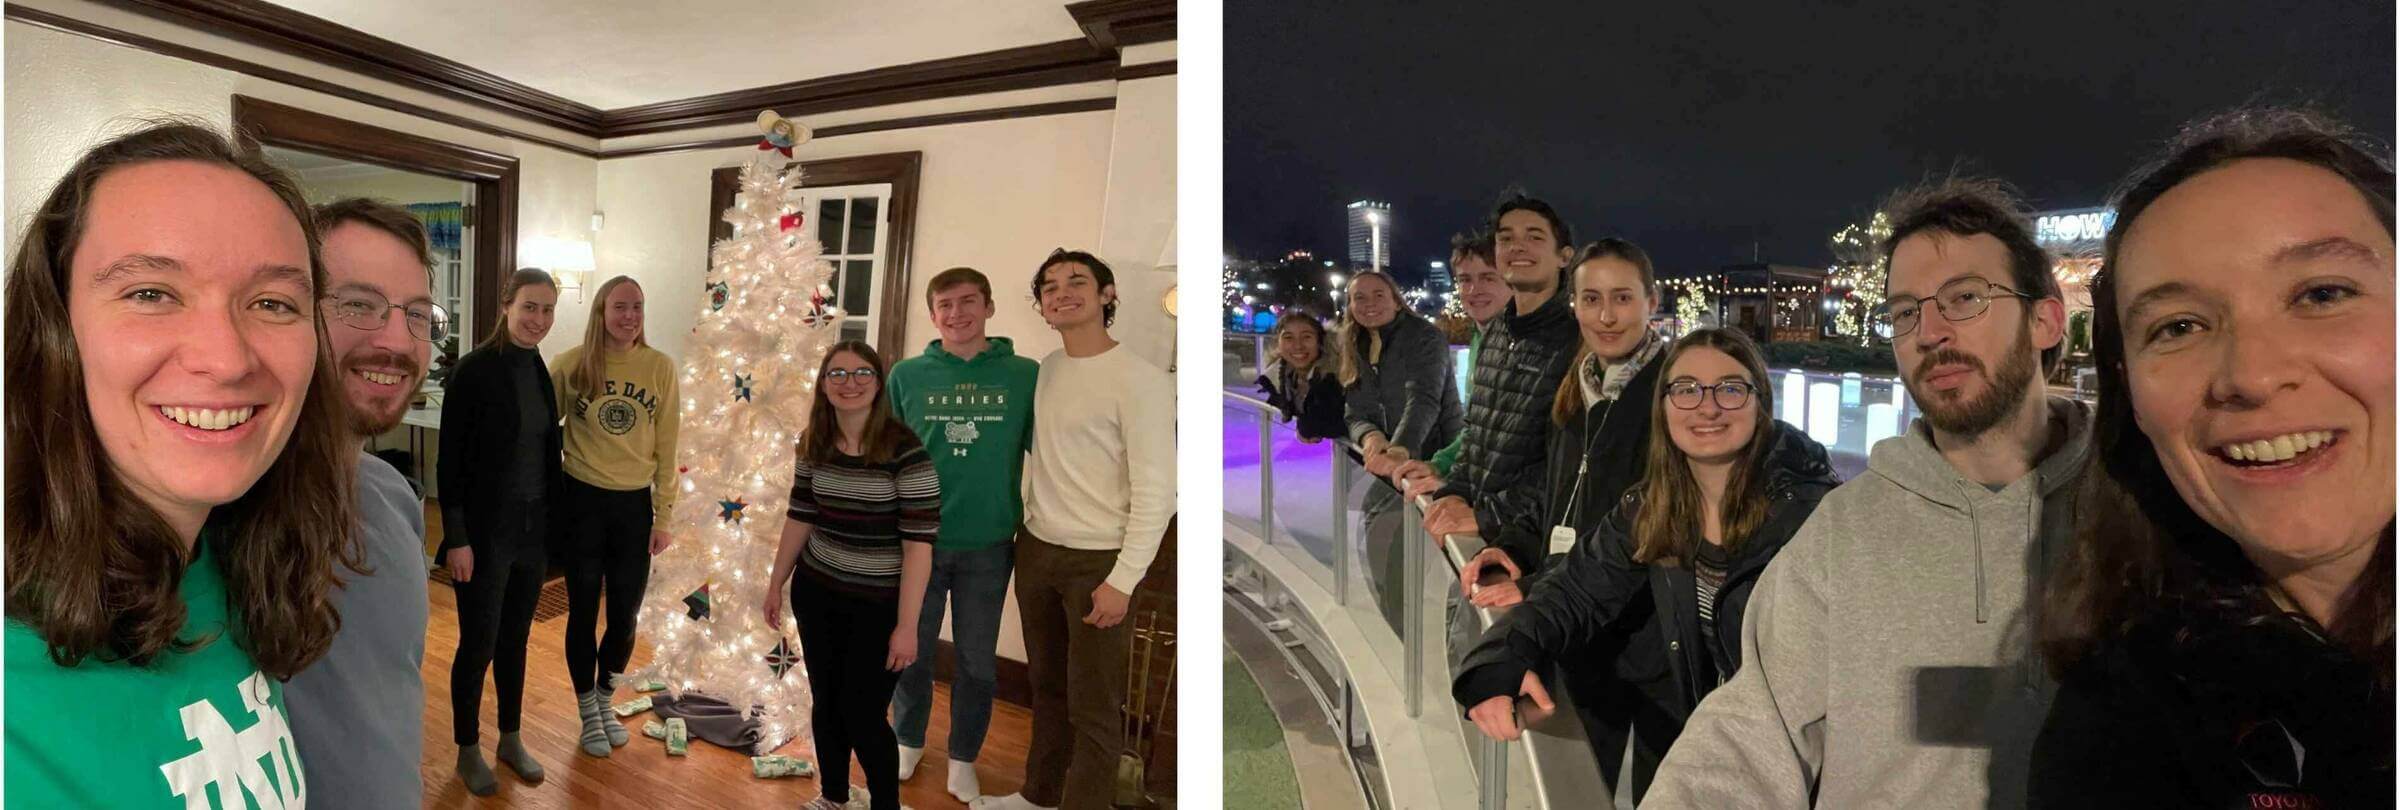 Photos of lab members in front of a Christmas tree and at an ice skating ribbon